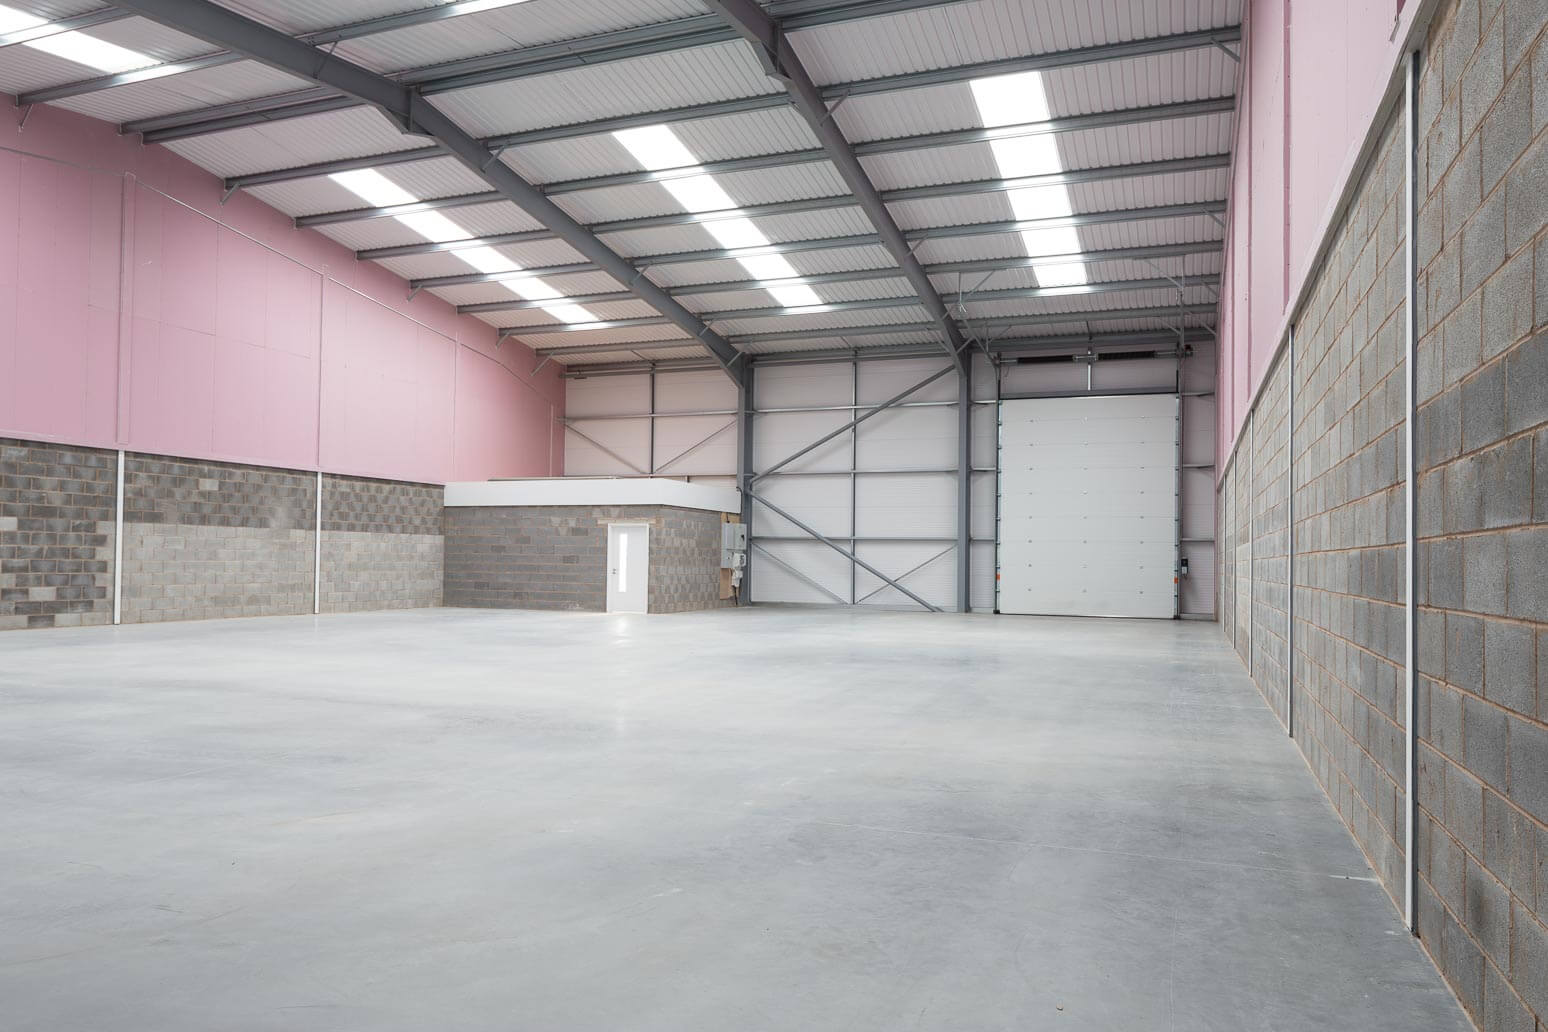 Commercial architecture and interior photography - Speke Industrial Park, Liverpool, Merseyside